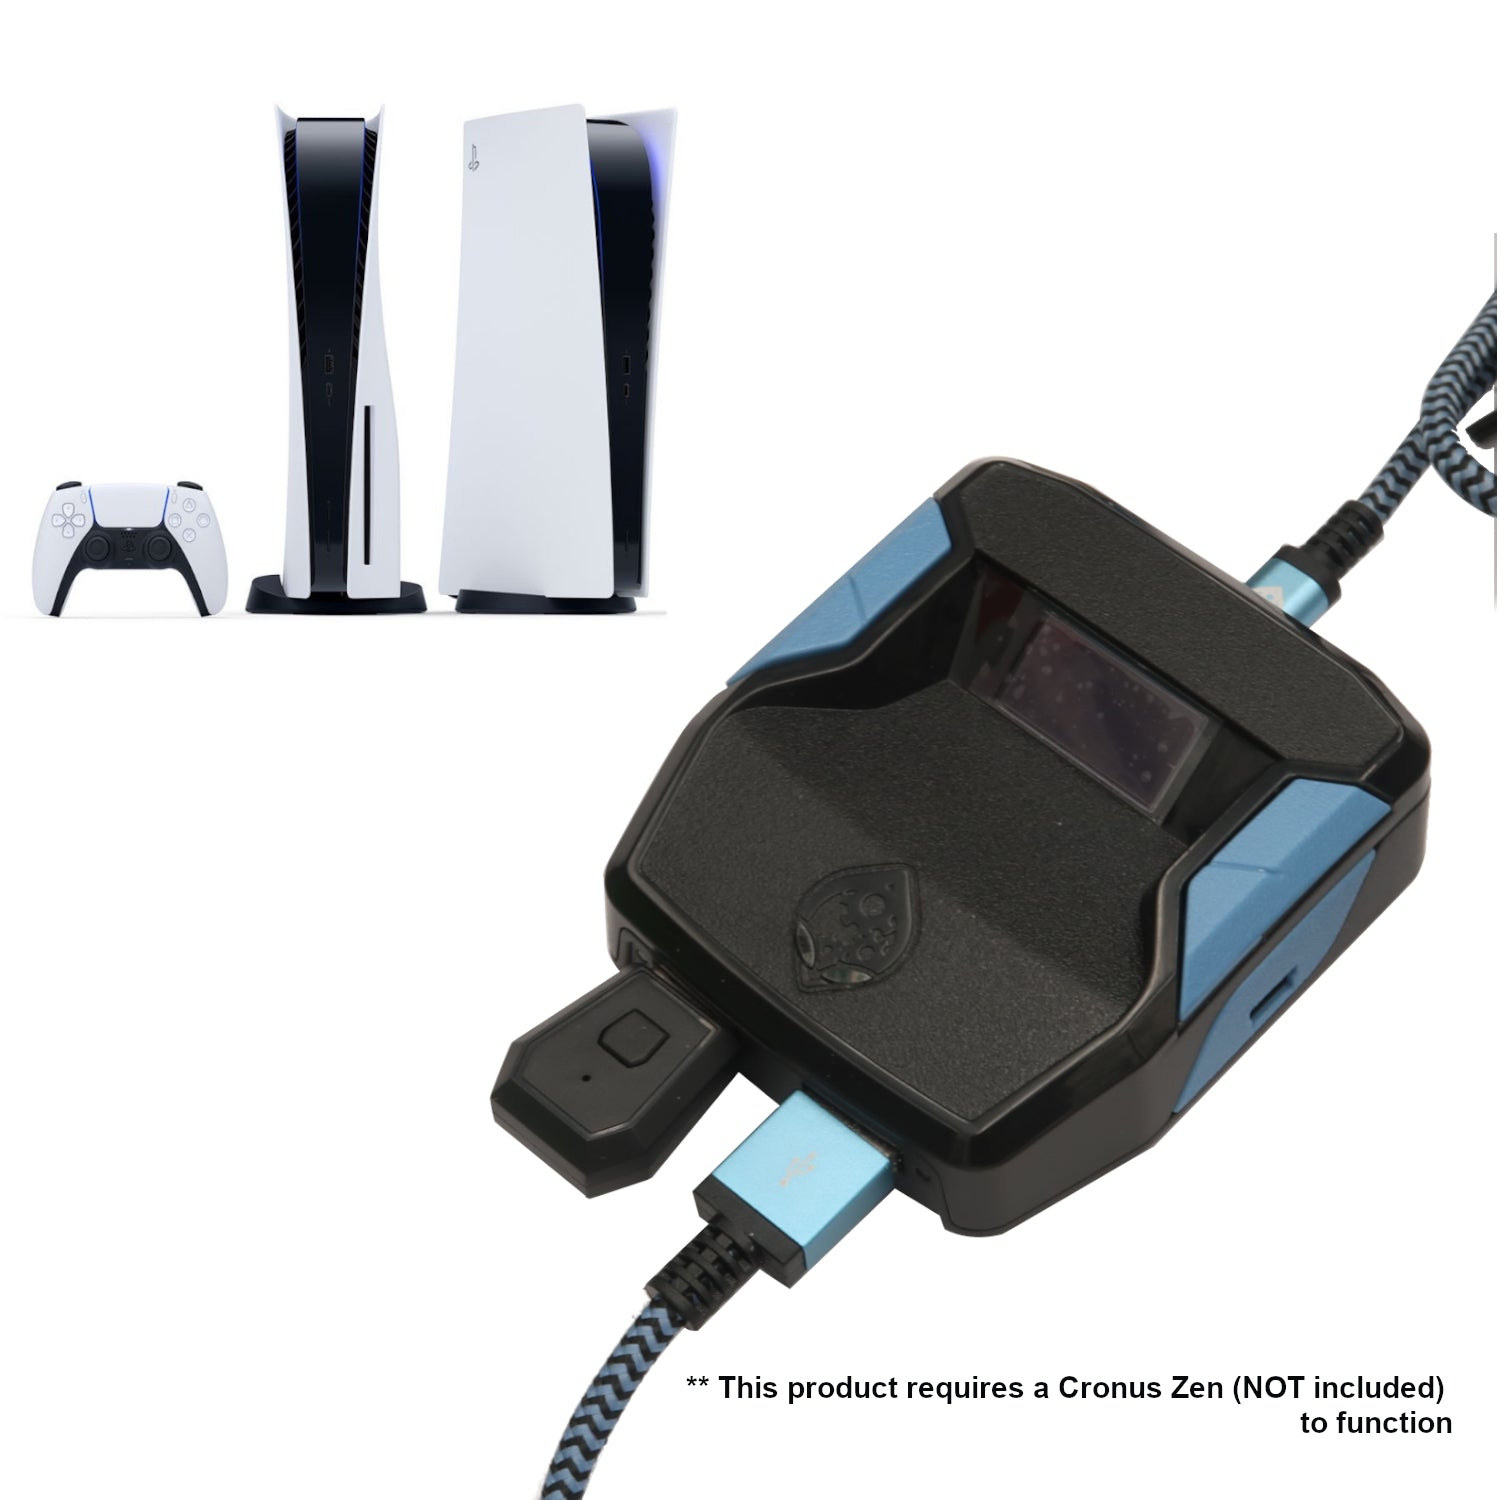 CRONUS ZEN PS5 DONGLE - MAKES CRONUS WORK WITH PS5 | FREE 24 HR Delivery